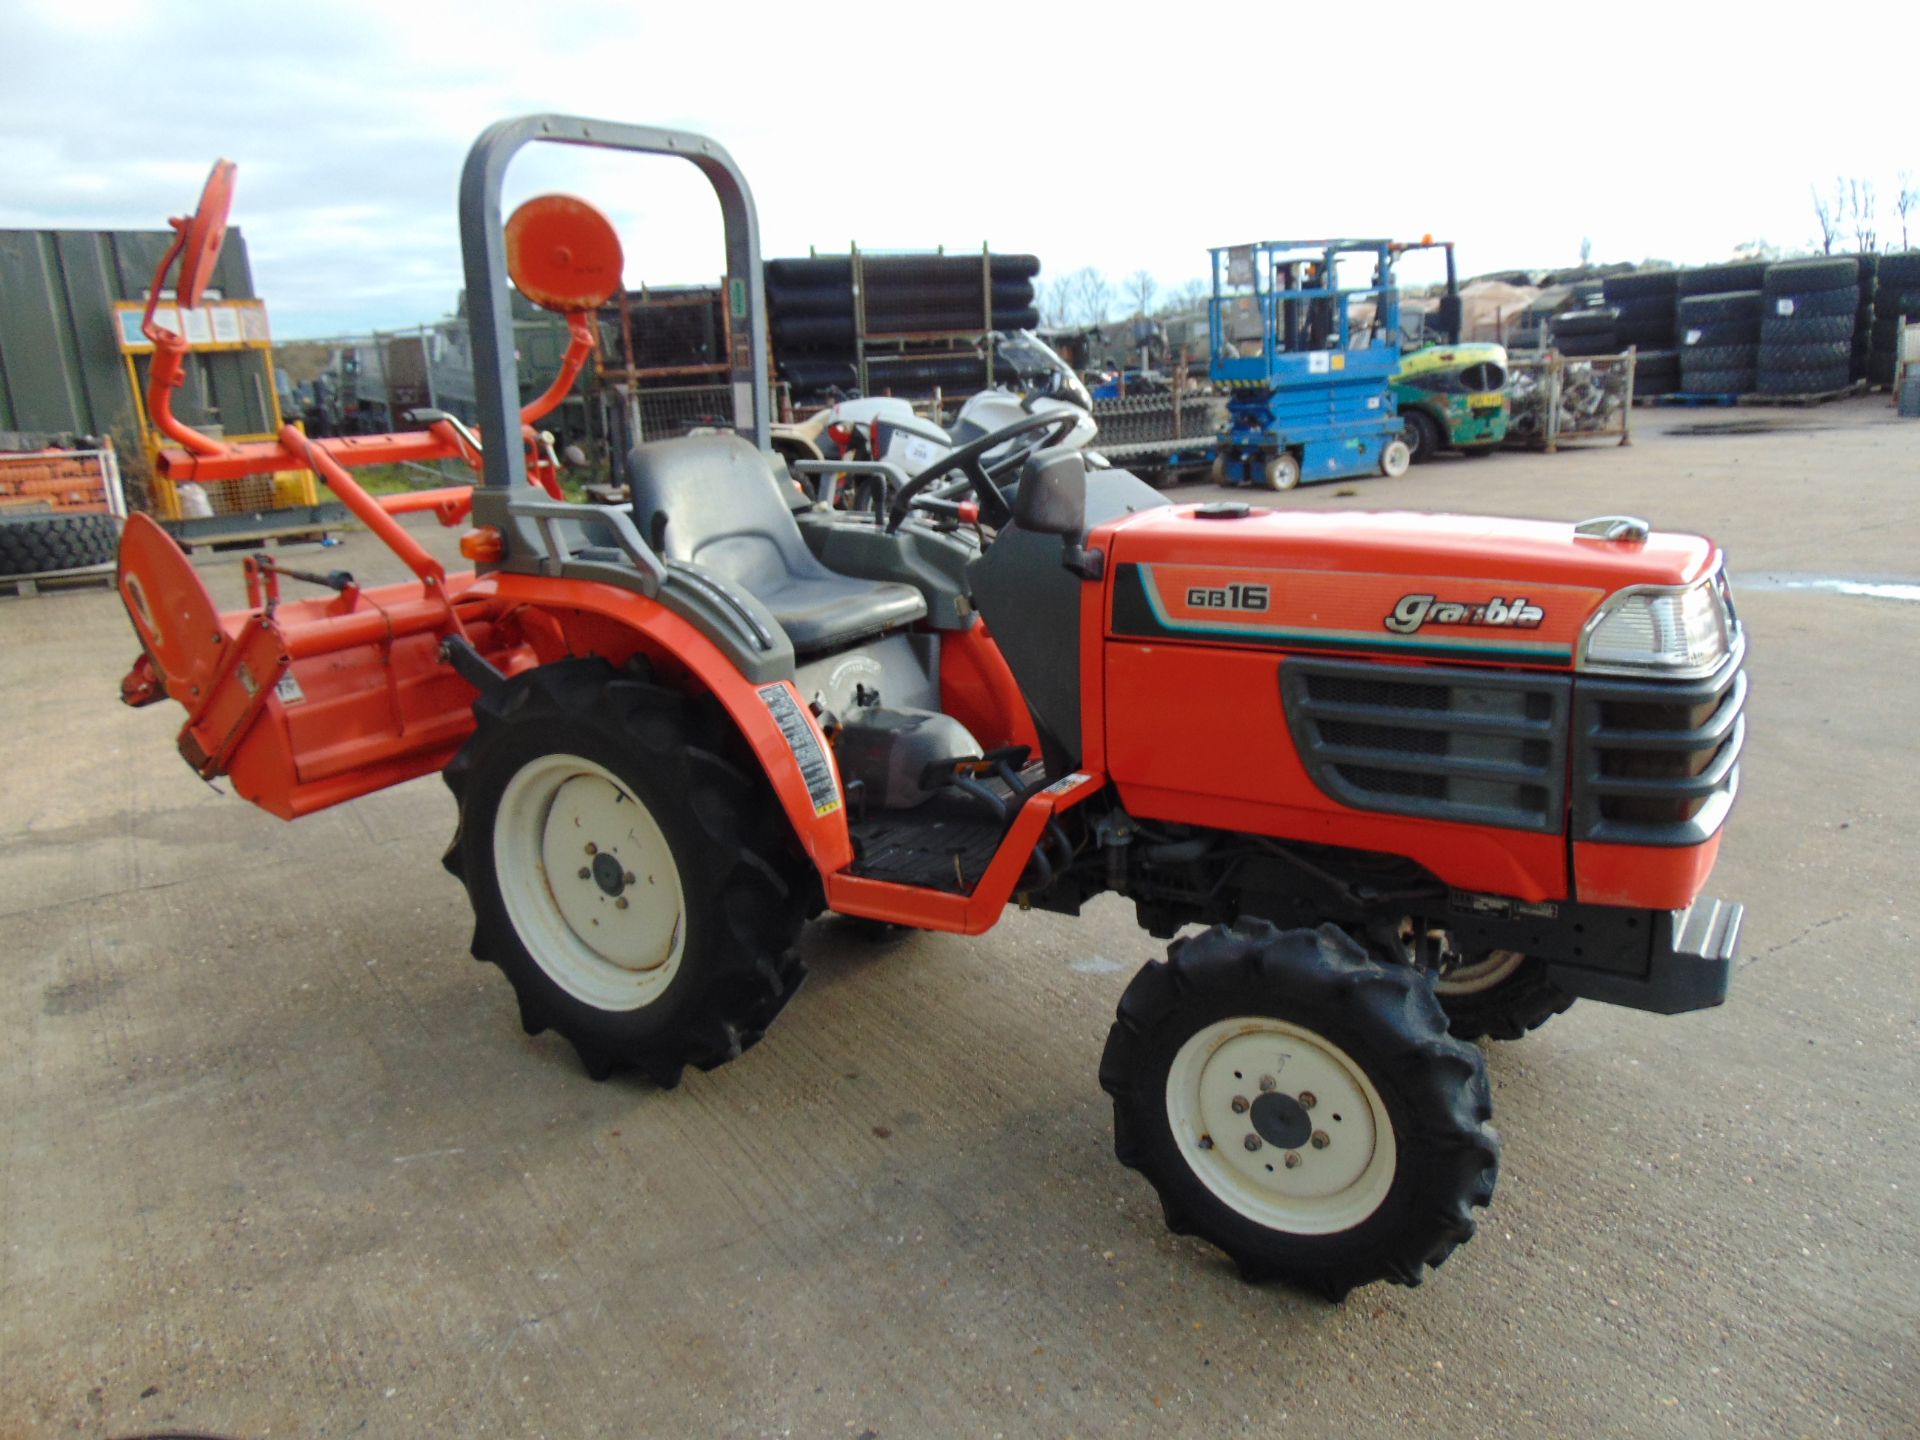 Kubota Granbia GB16 4x4 Diesel Compact Tractor c/w Rotovator ONLY 467 HOURS! - Image 5 of 24